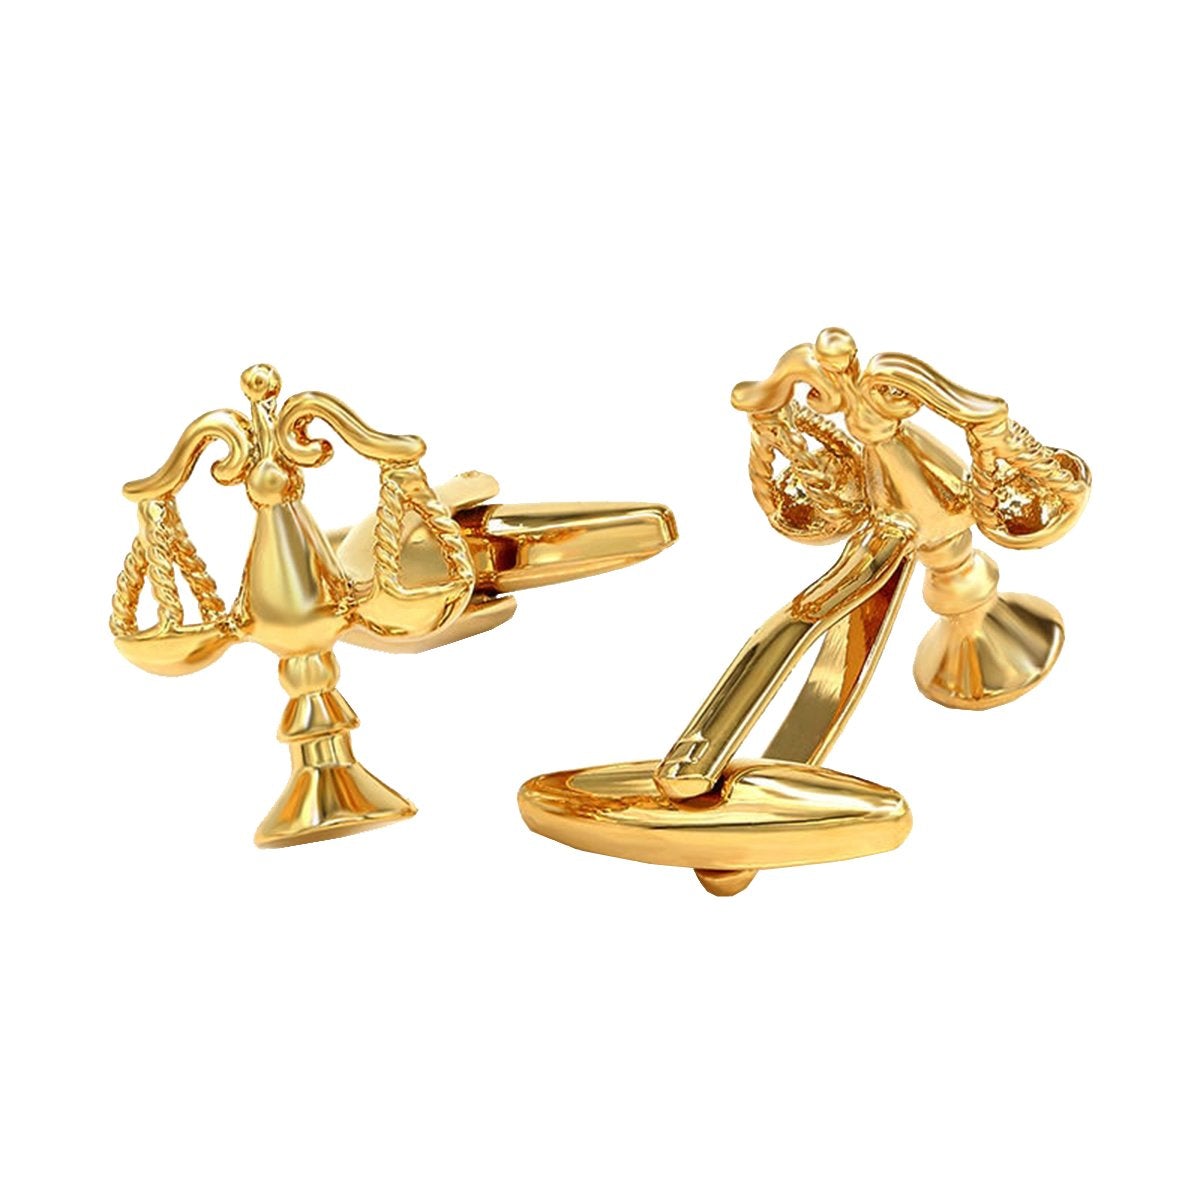 Justic Of Law Scale Cufflinks In Box